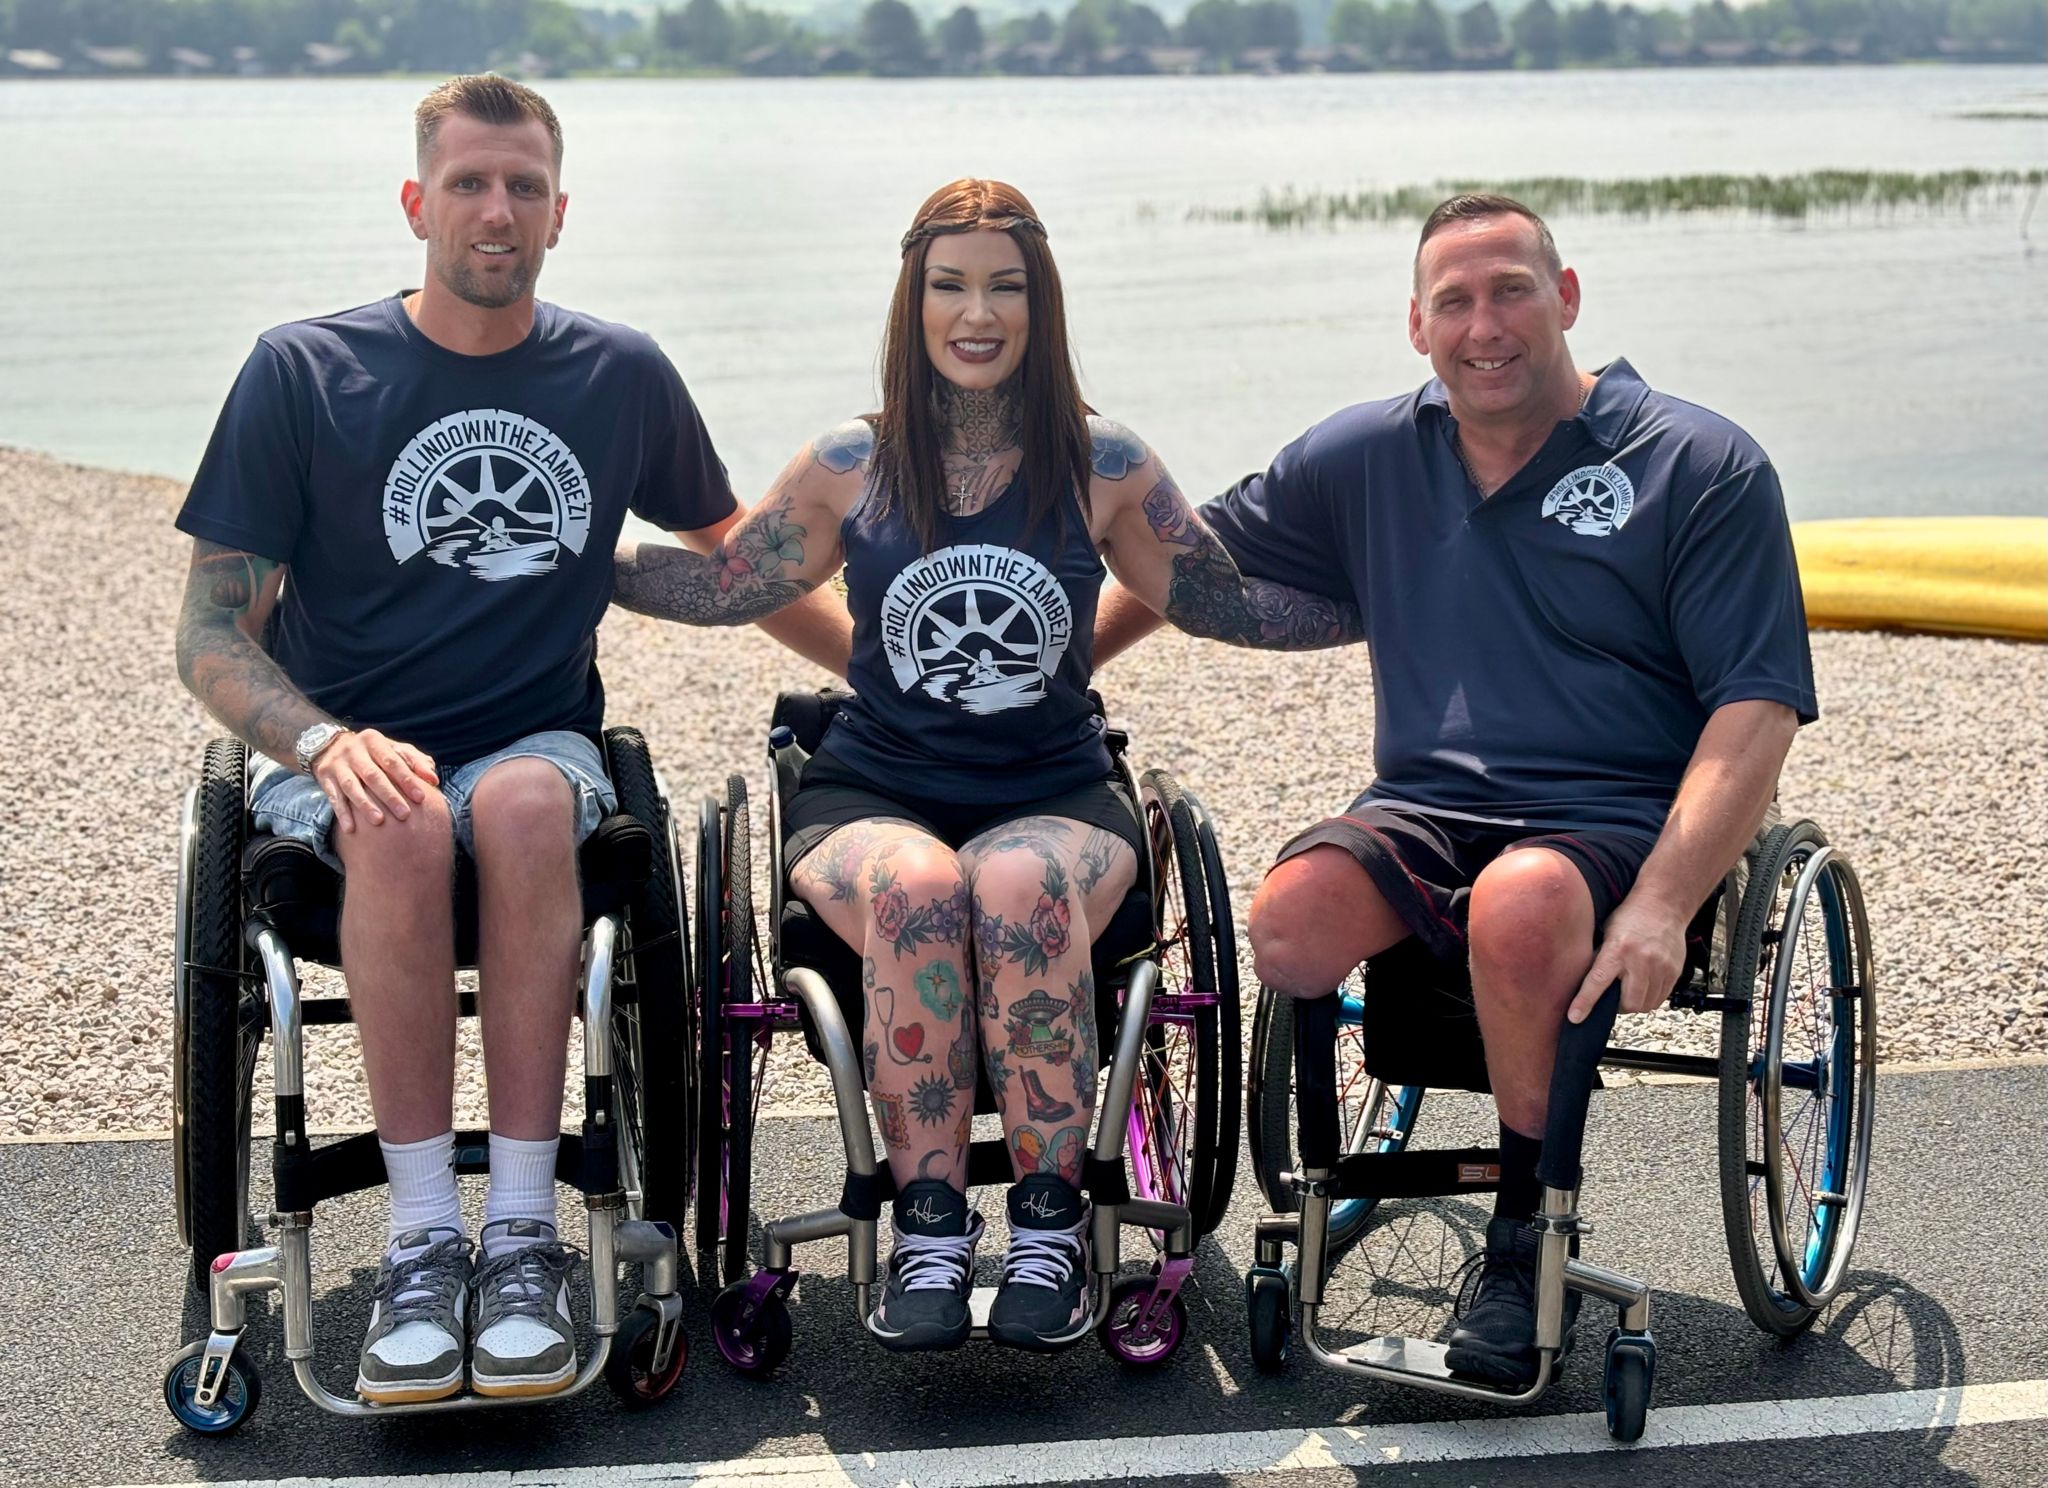 The three paddlers sitting in their wheelchairs on the shore while linking arms